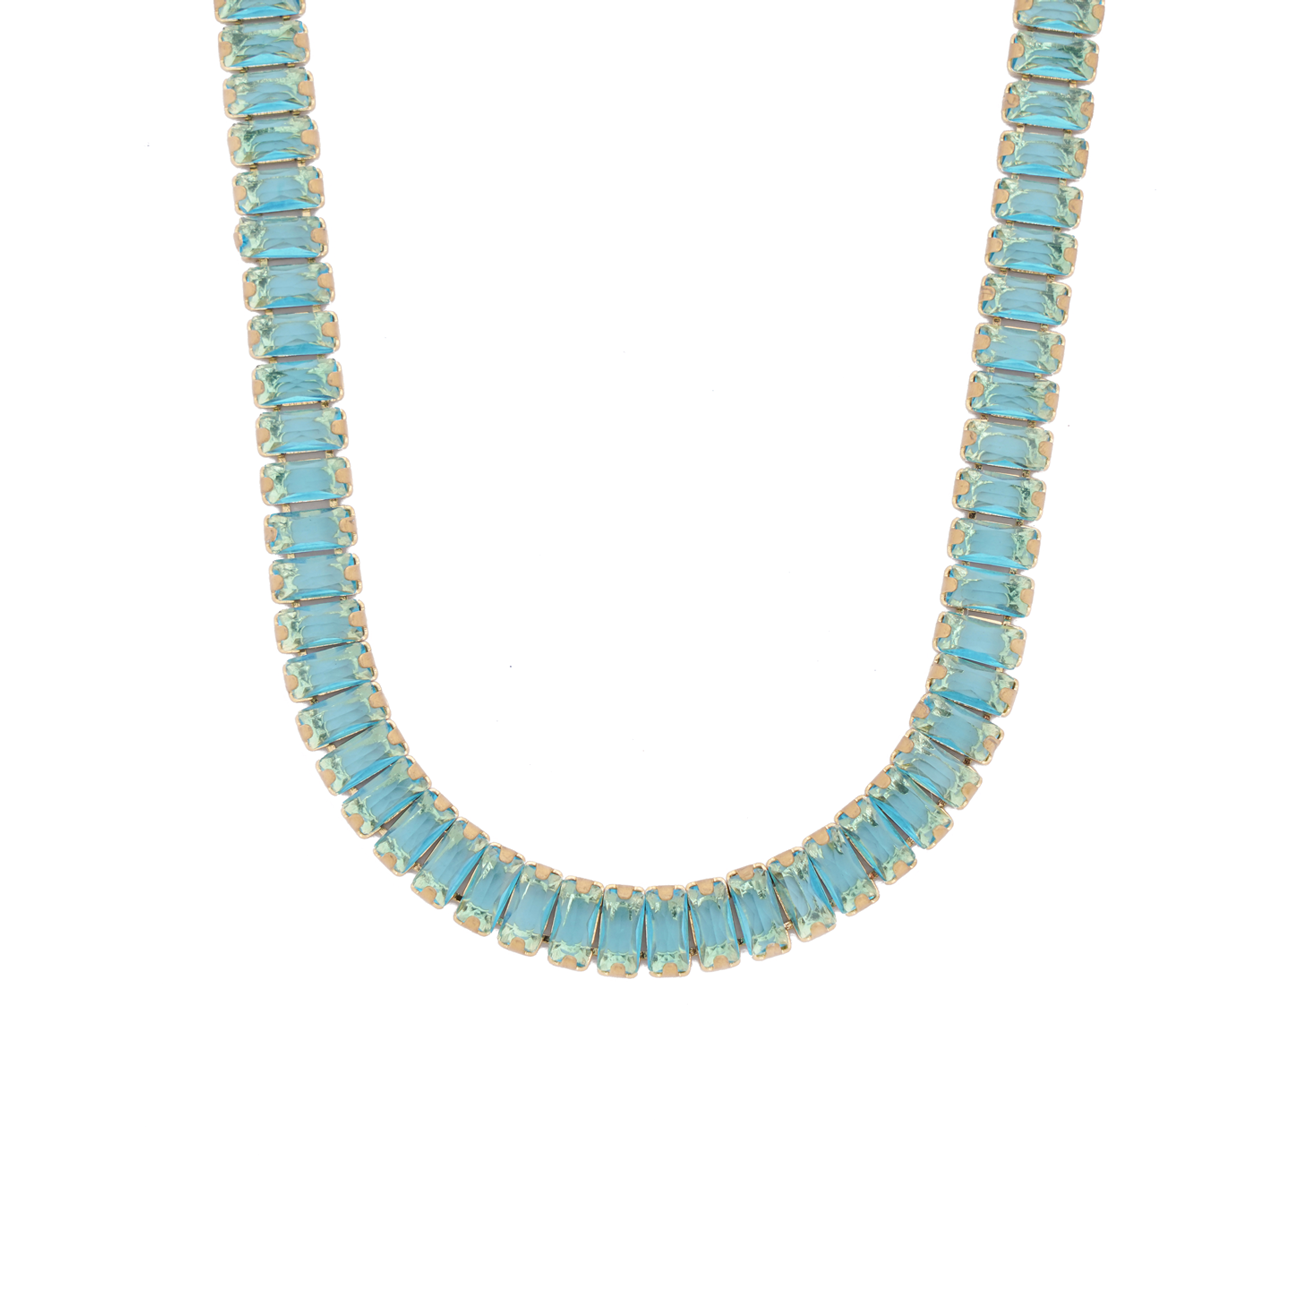 Haley necklace - Turquoise